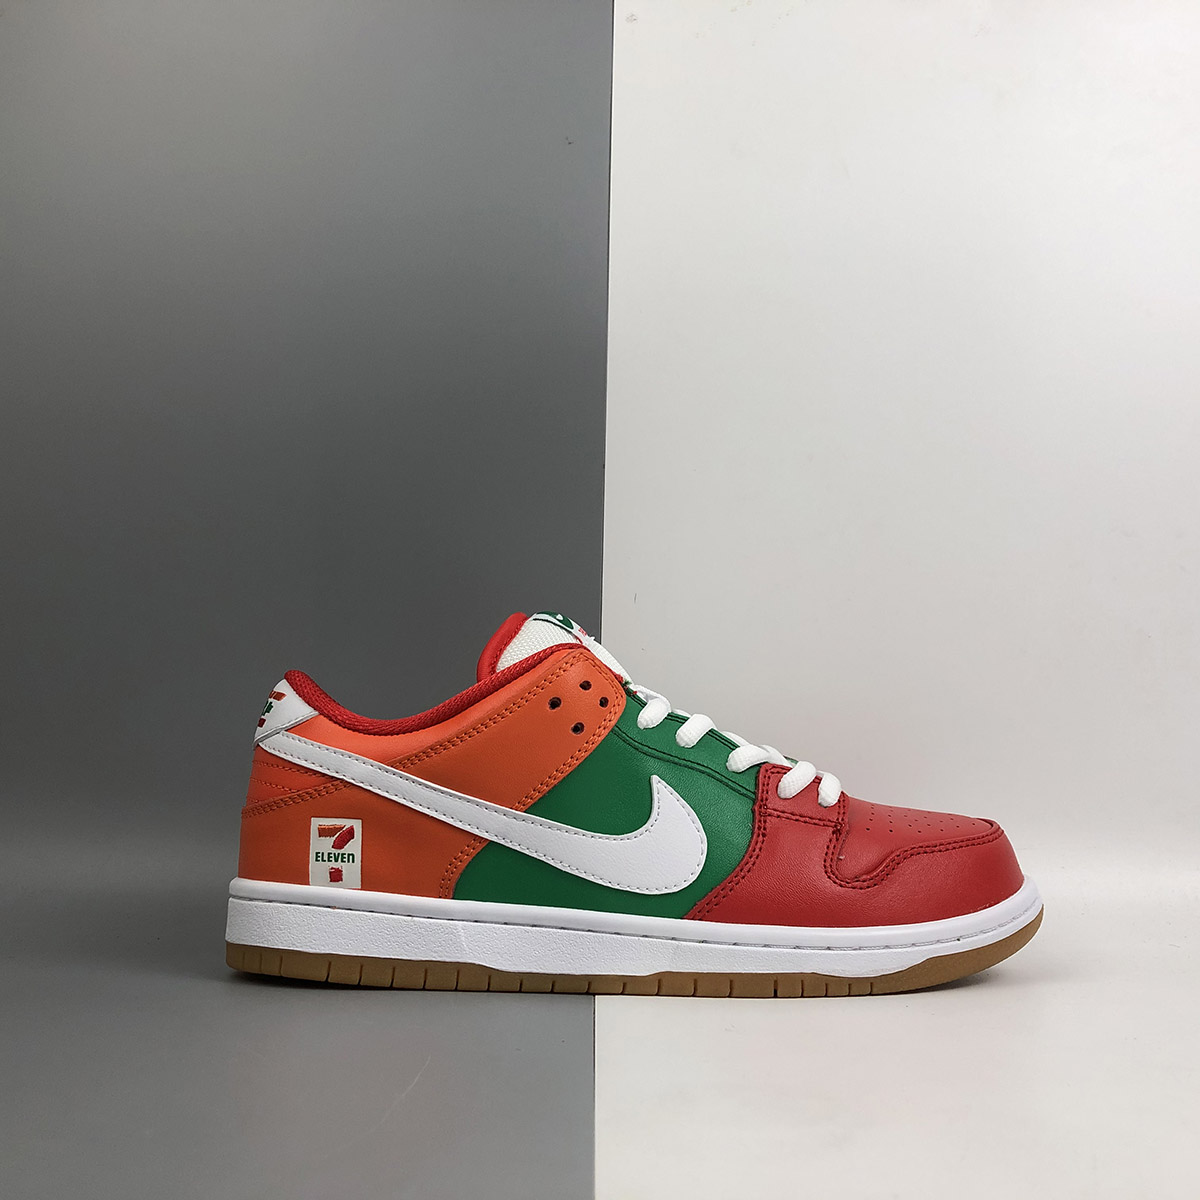 red and green nike shoes